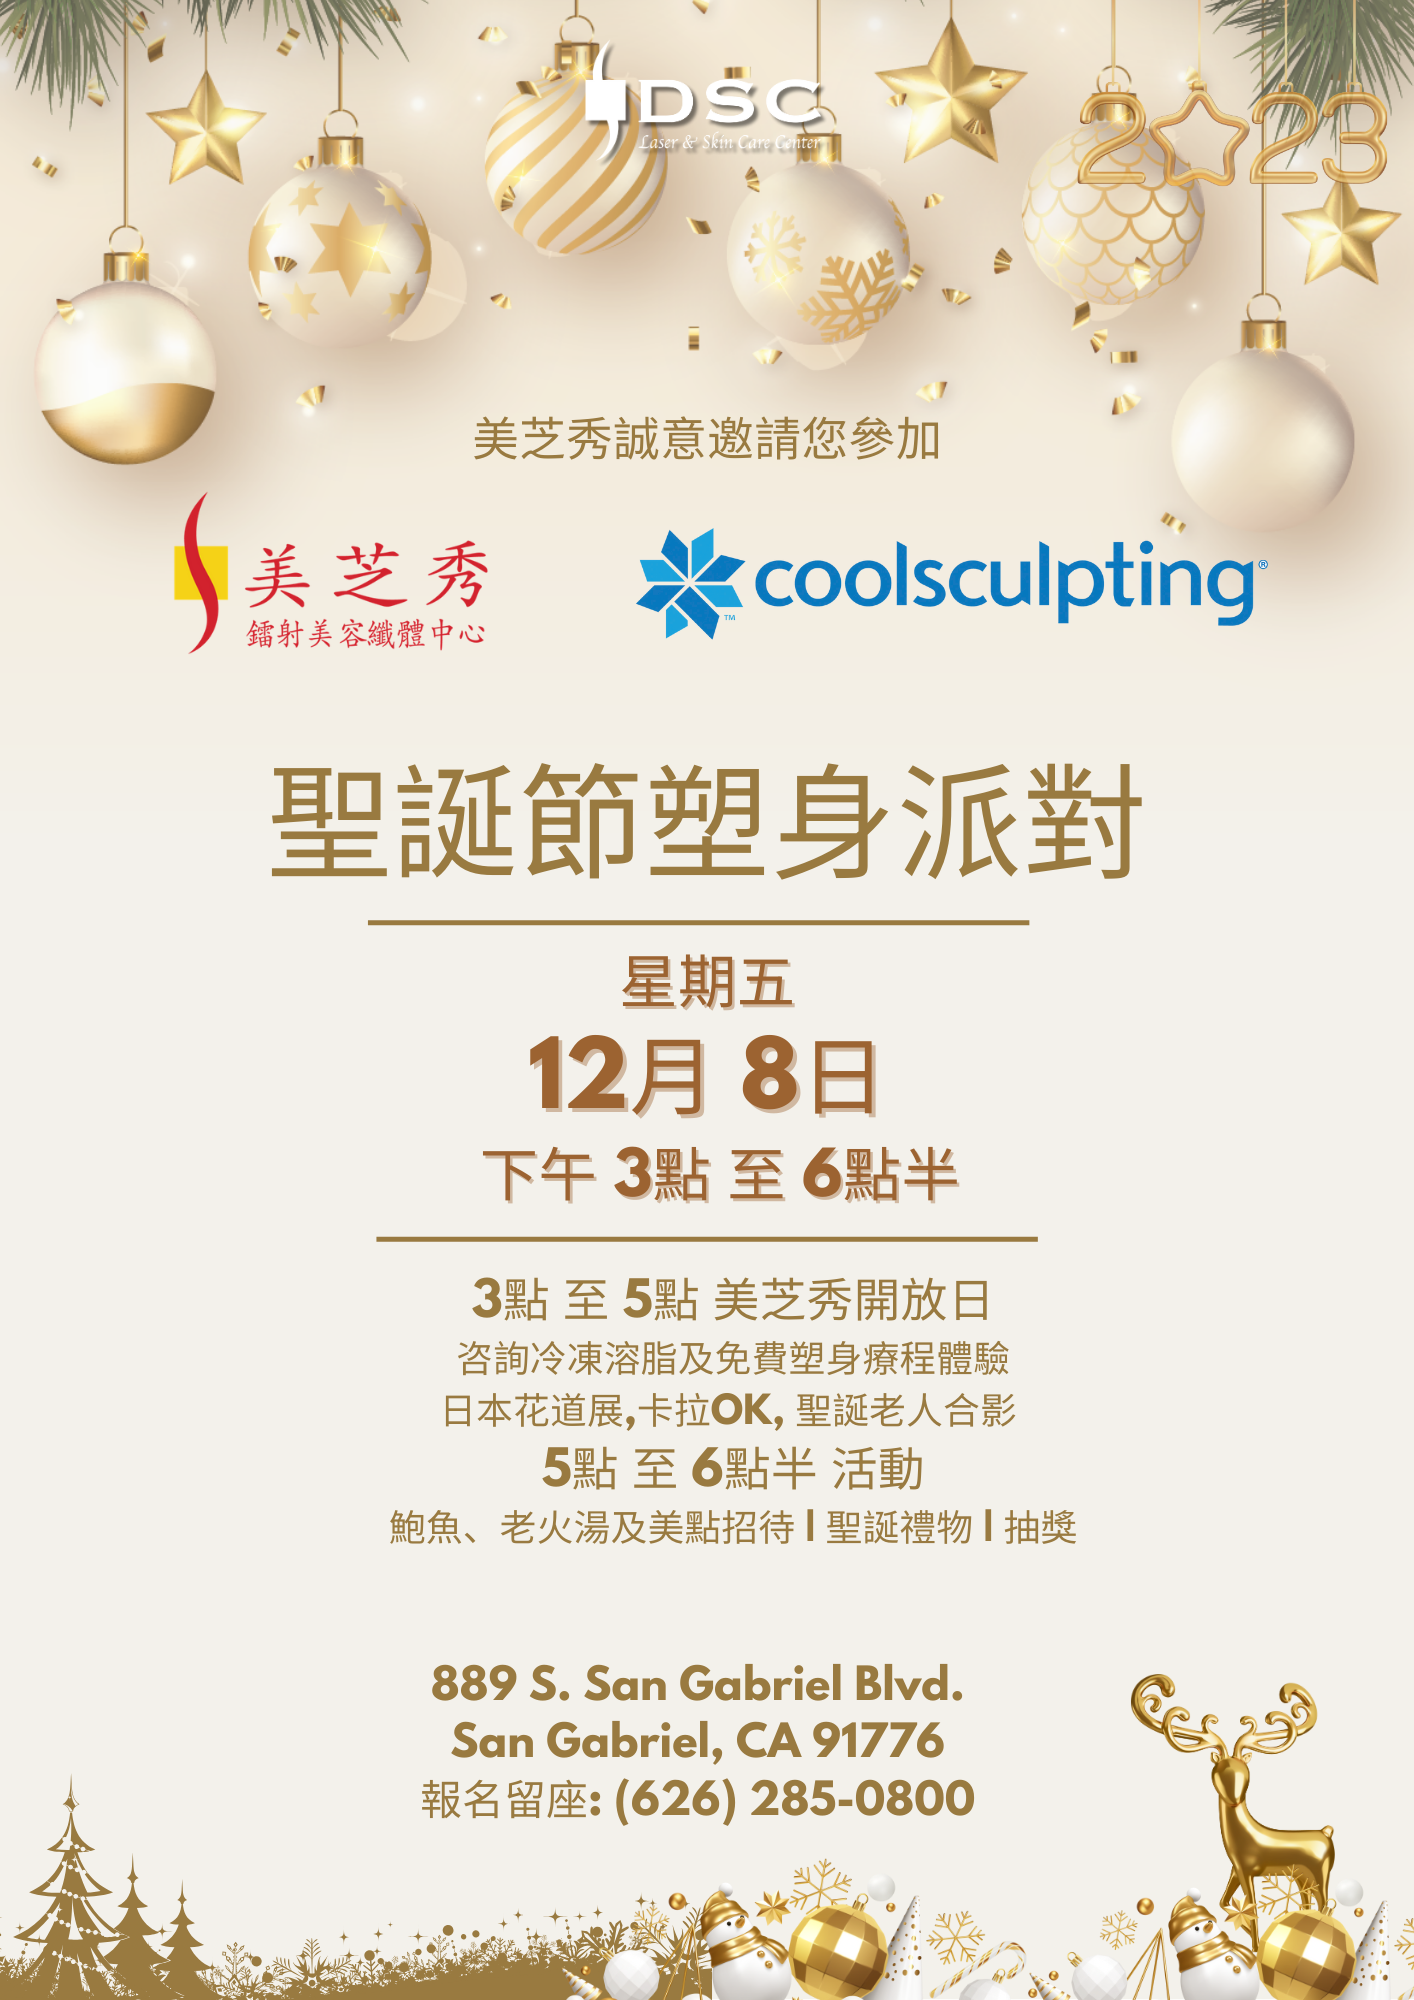 DSC Holiday Christmas Event 2023 December 1282023 Invitation Flyer with DSC logo and Coolsculpting logo, Friday December 8th, 2023 from 3PM - 6:30PM in chinese